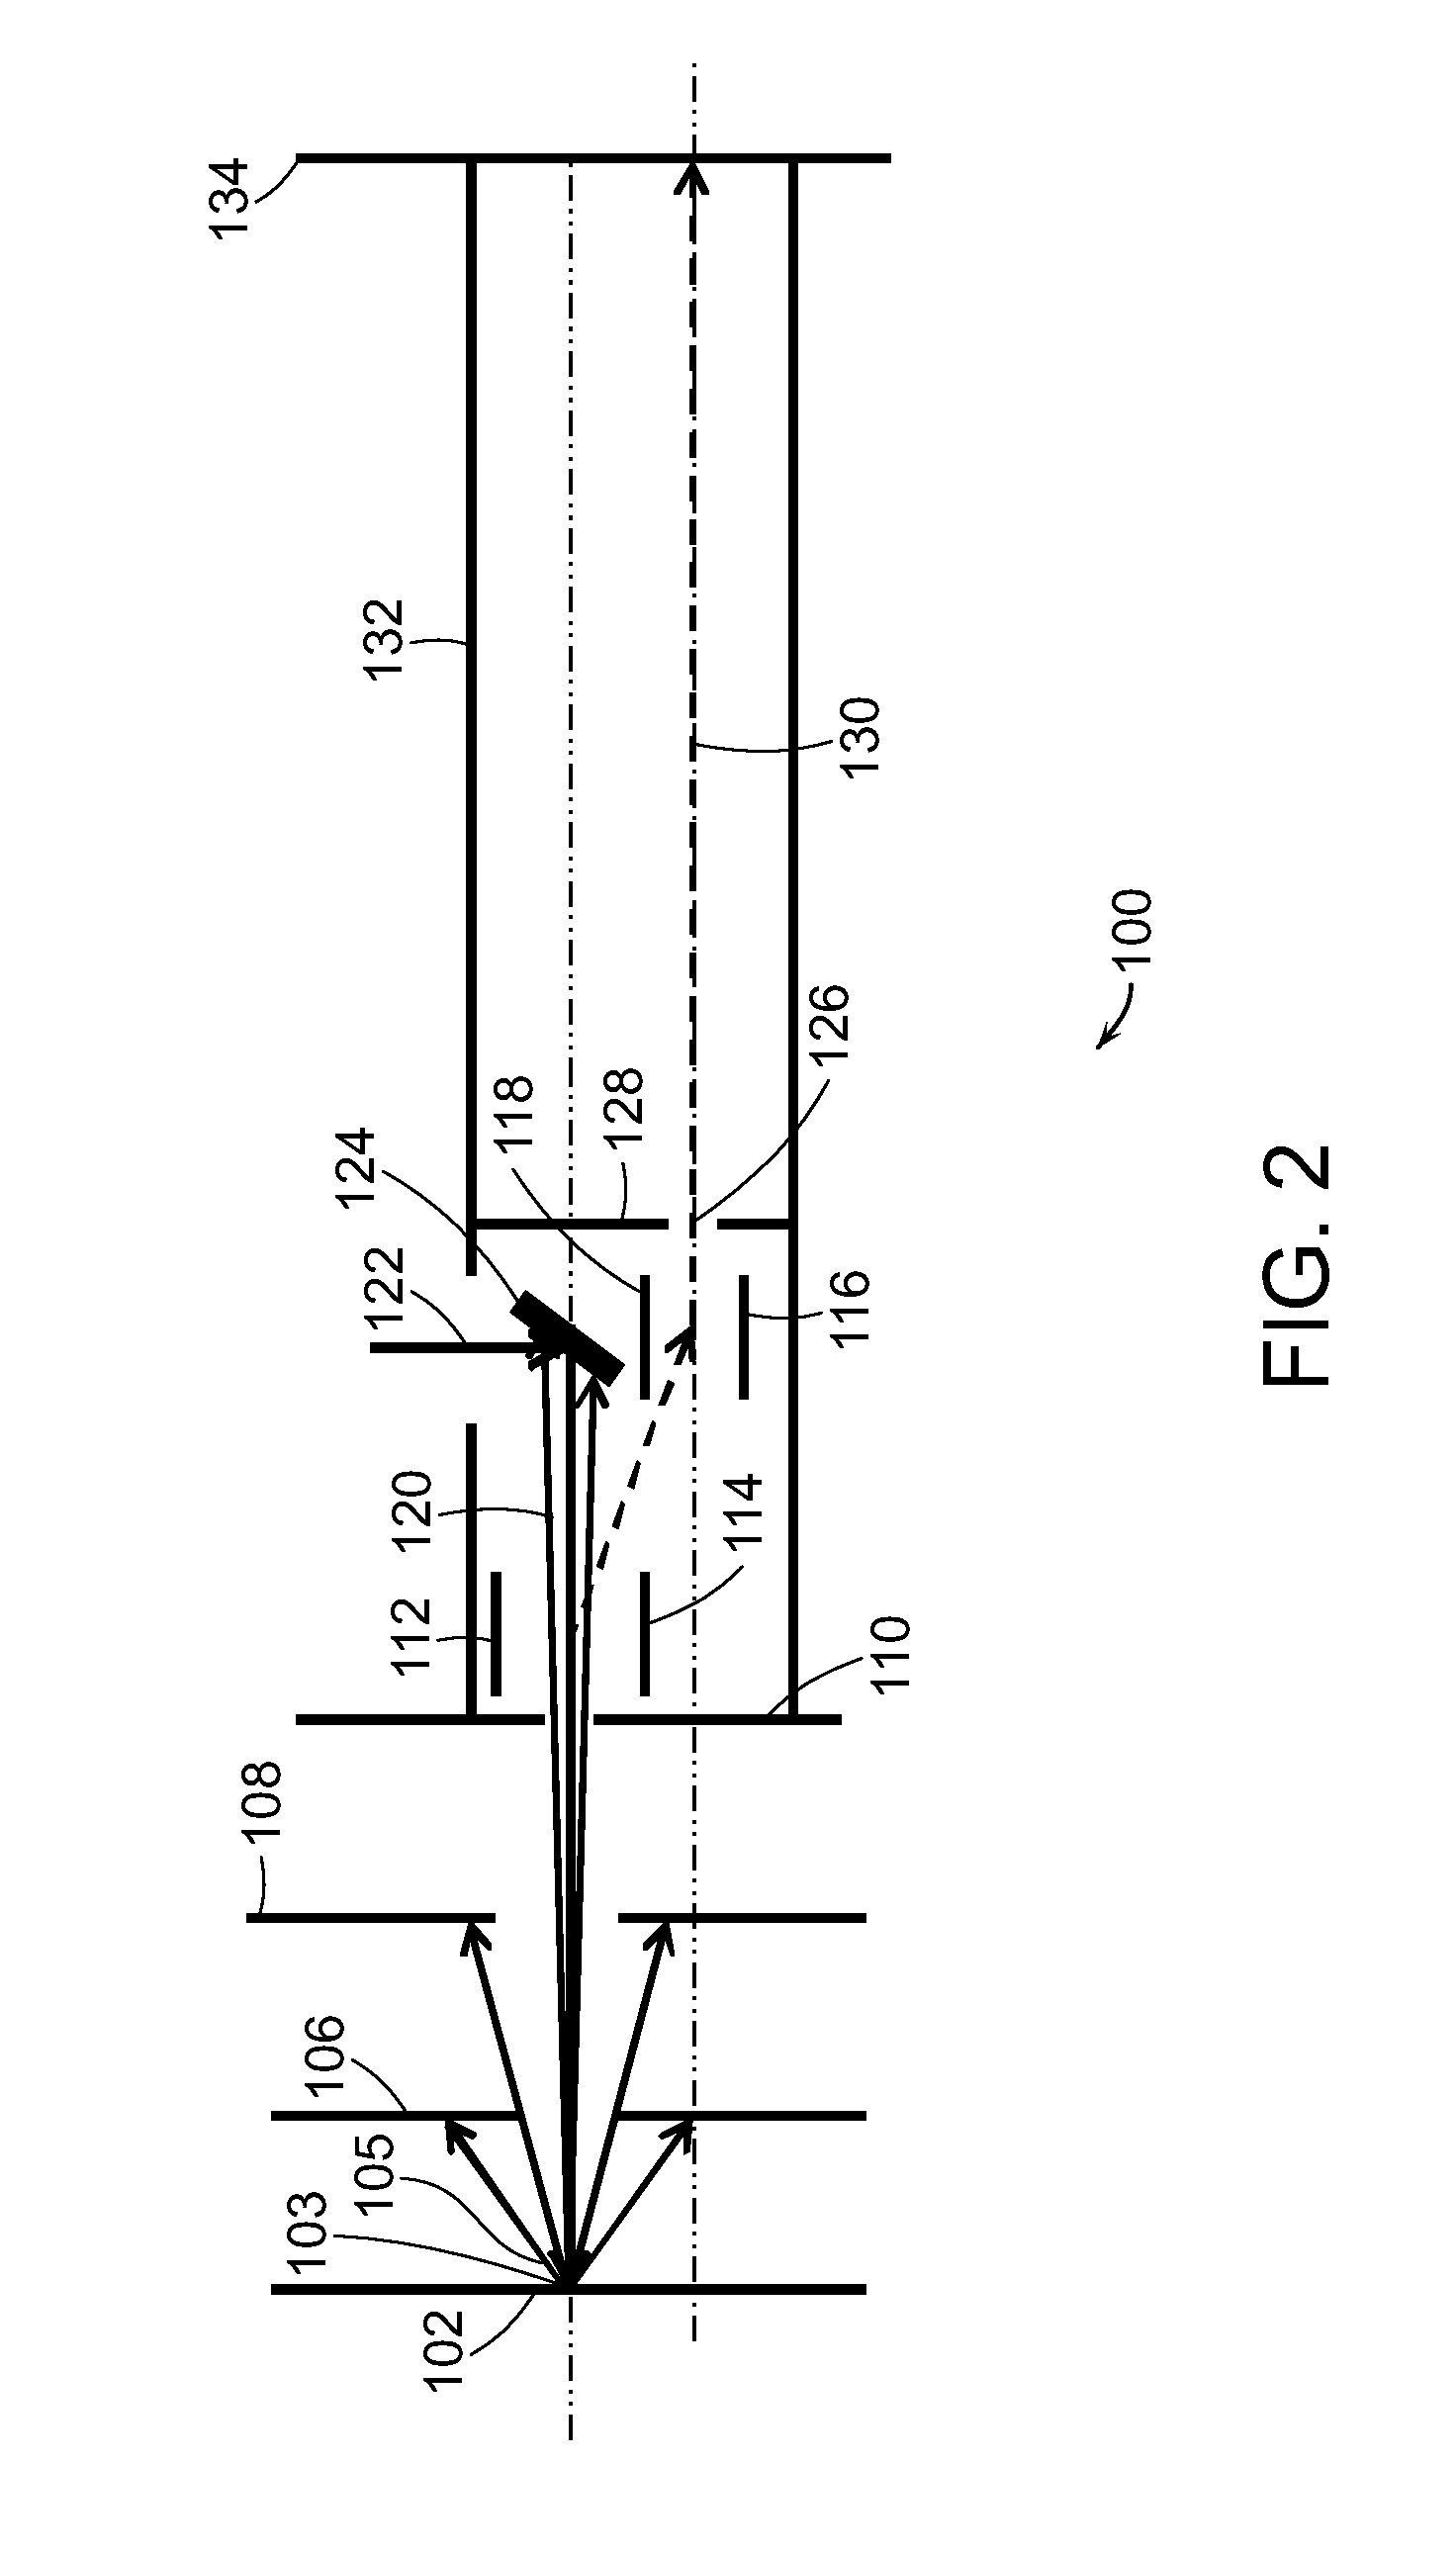 Ion Optical System For MALDI-TOF Mass Spectrometer